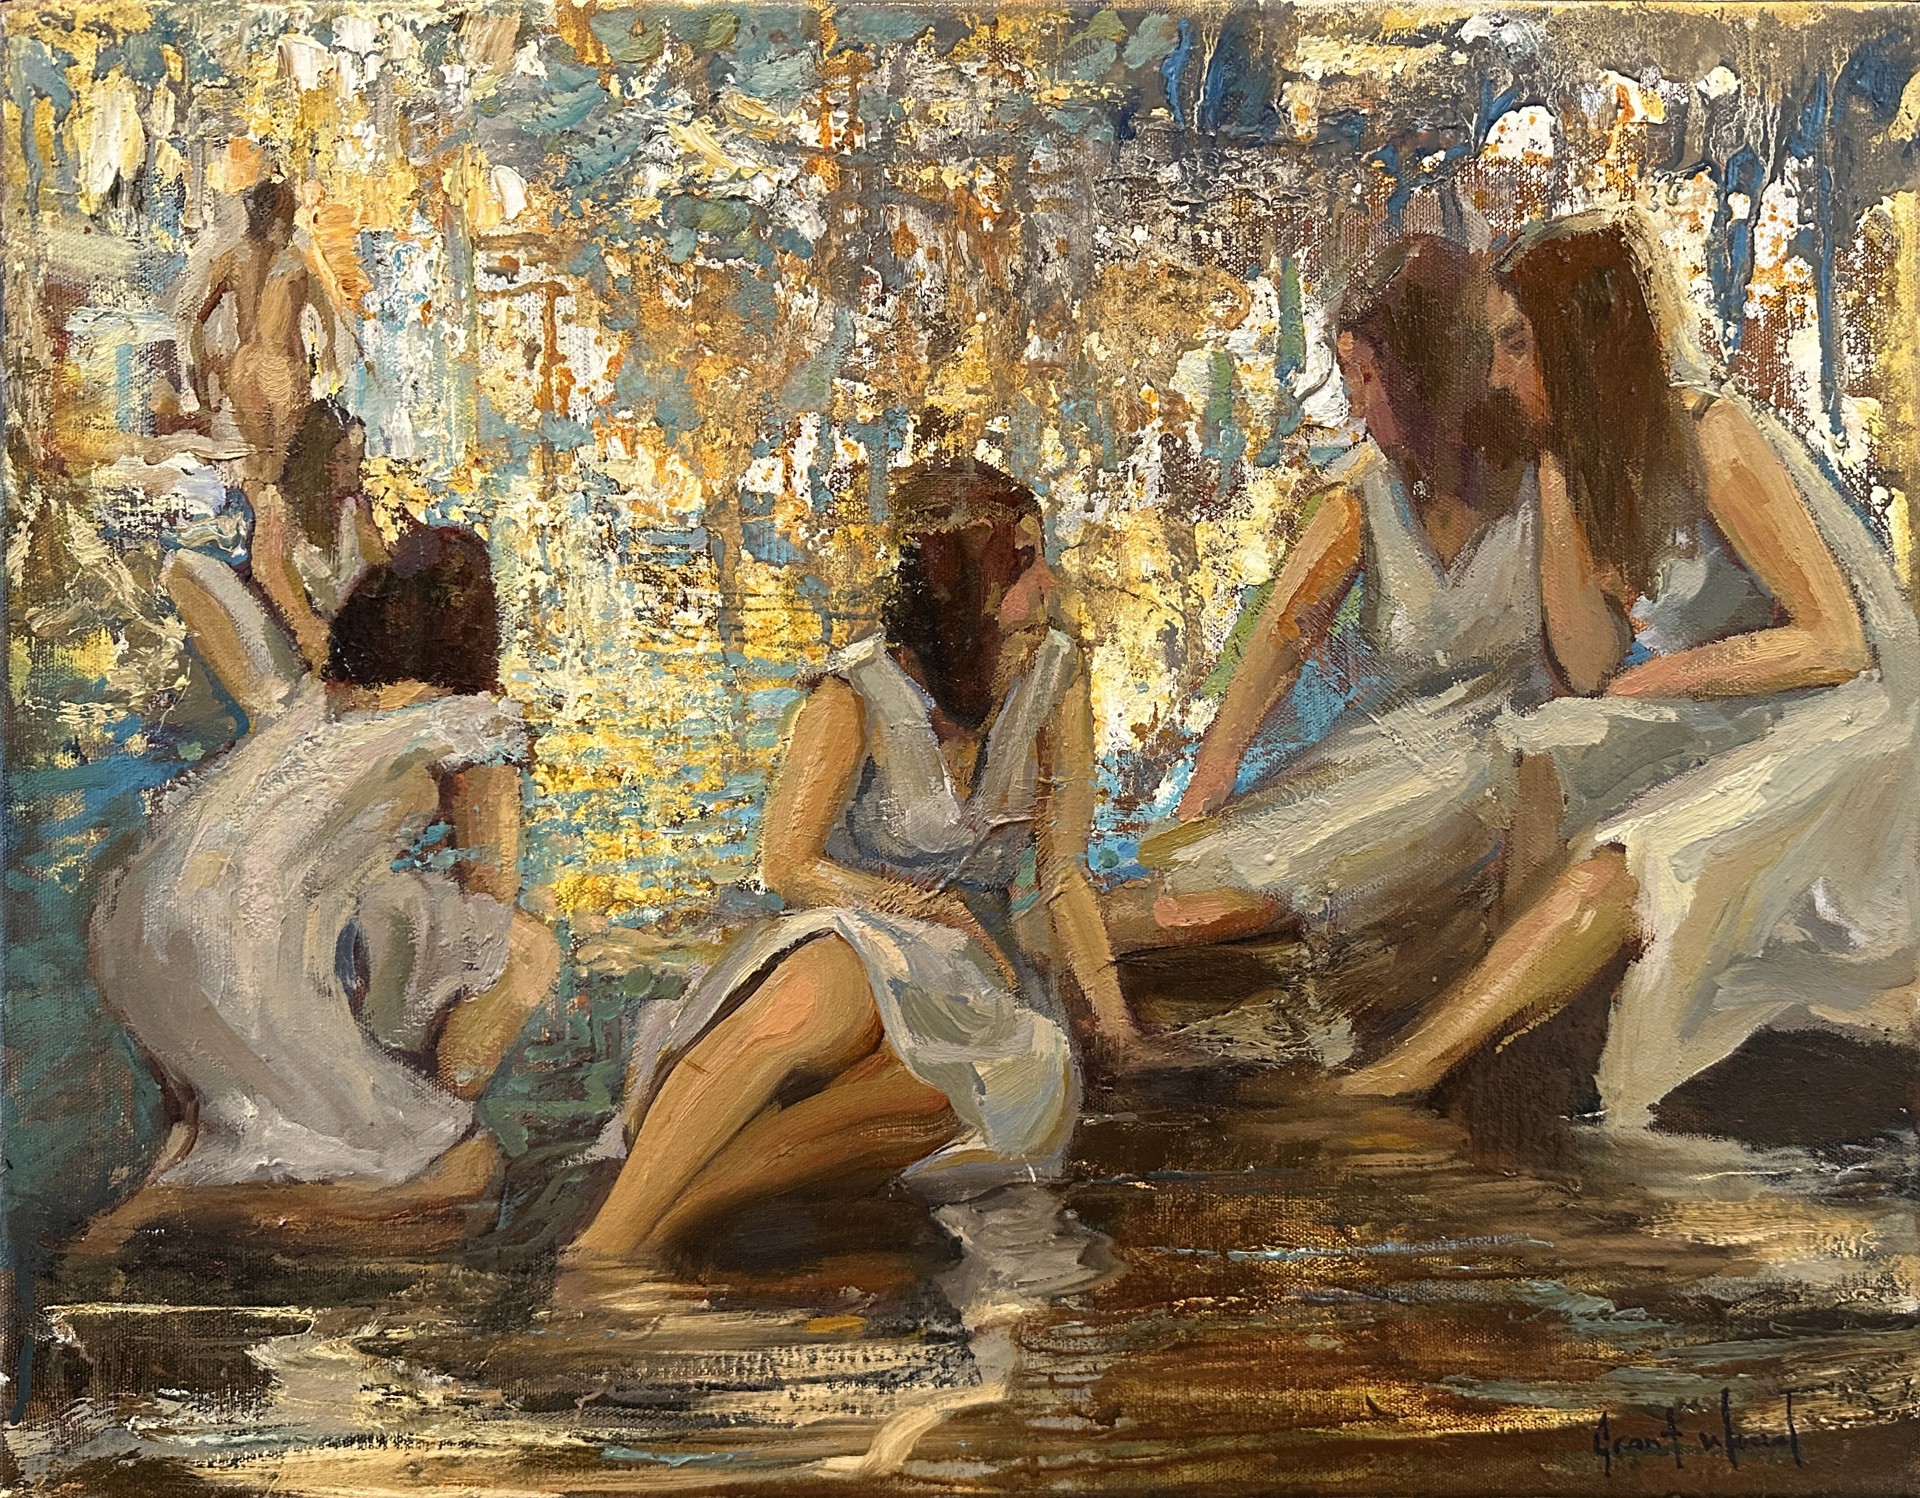 Bathers by Grant E. Wood